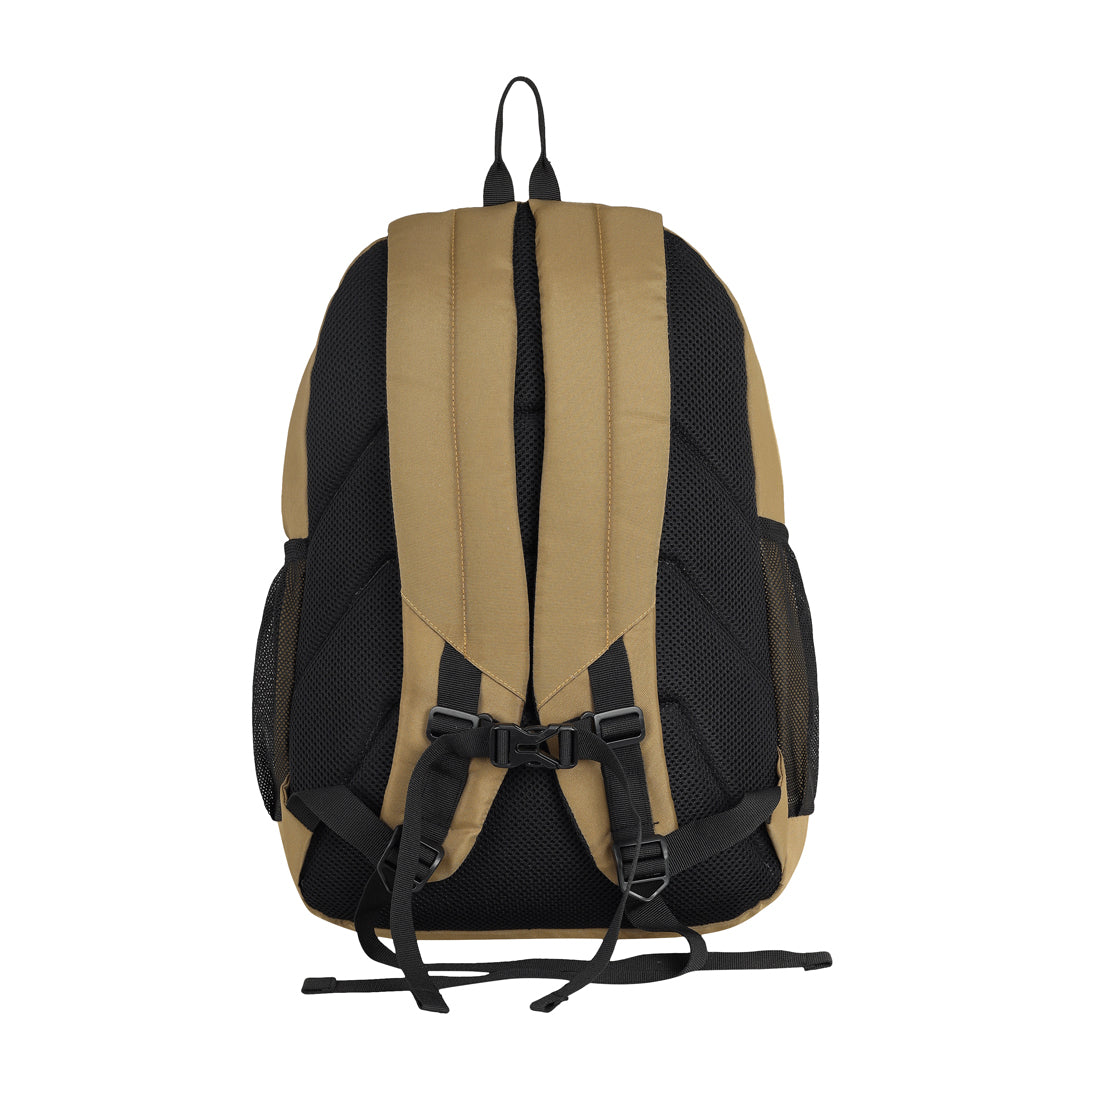 Fly Fashion Polyester Water Repellent Casual College Backpack for Laptop Bag up to 16 inch Men Women Dark Khaki